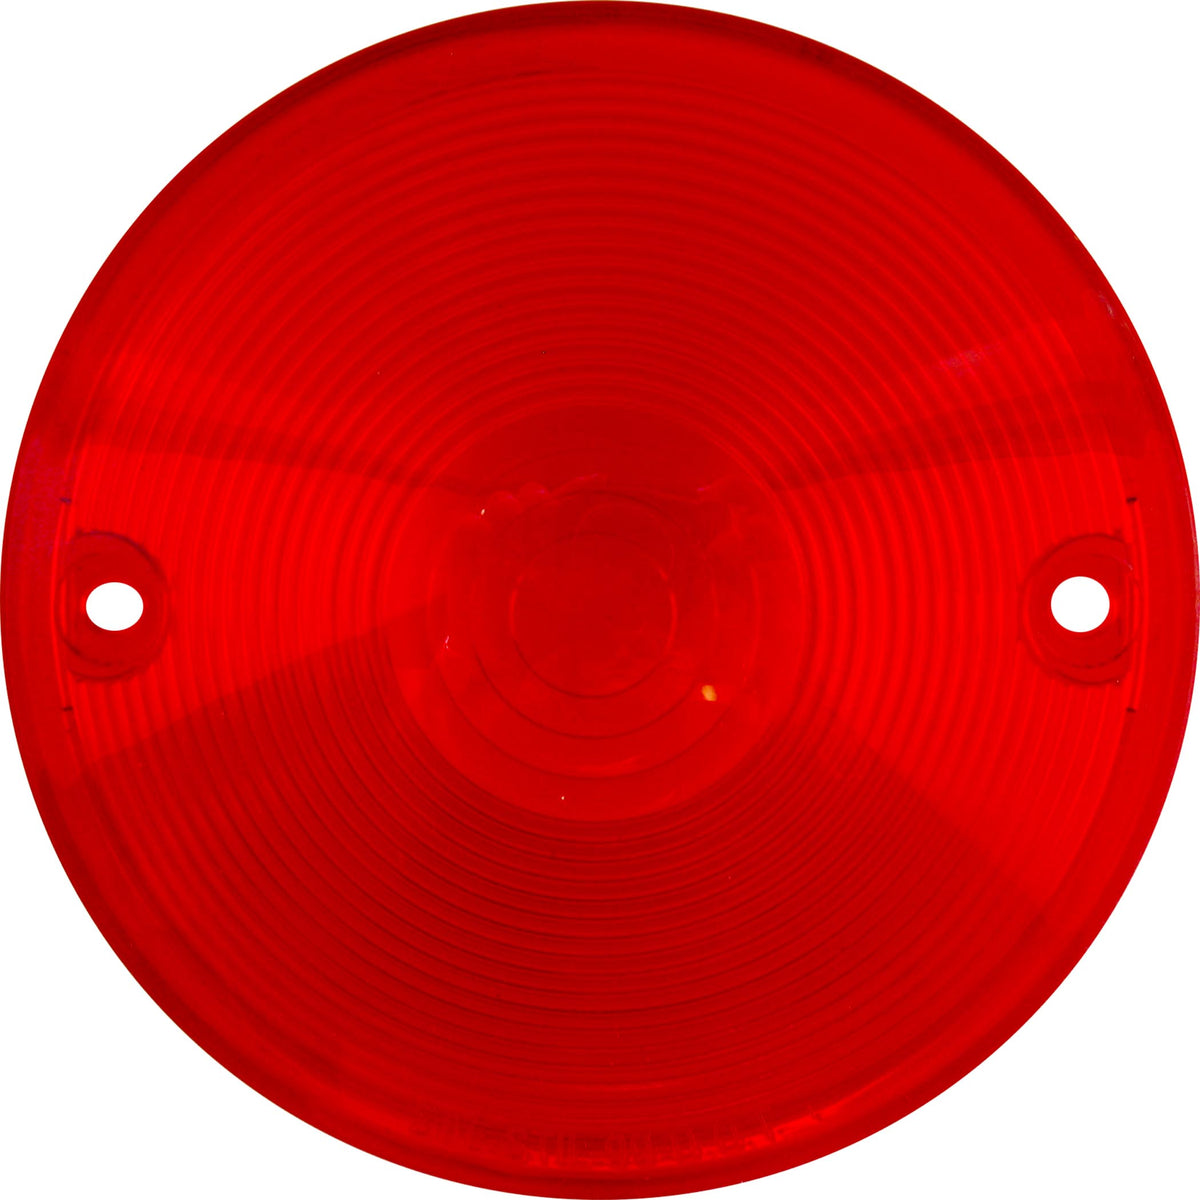 Optronics A20R Replacement Lens for Round Tail Light - Red